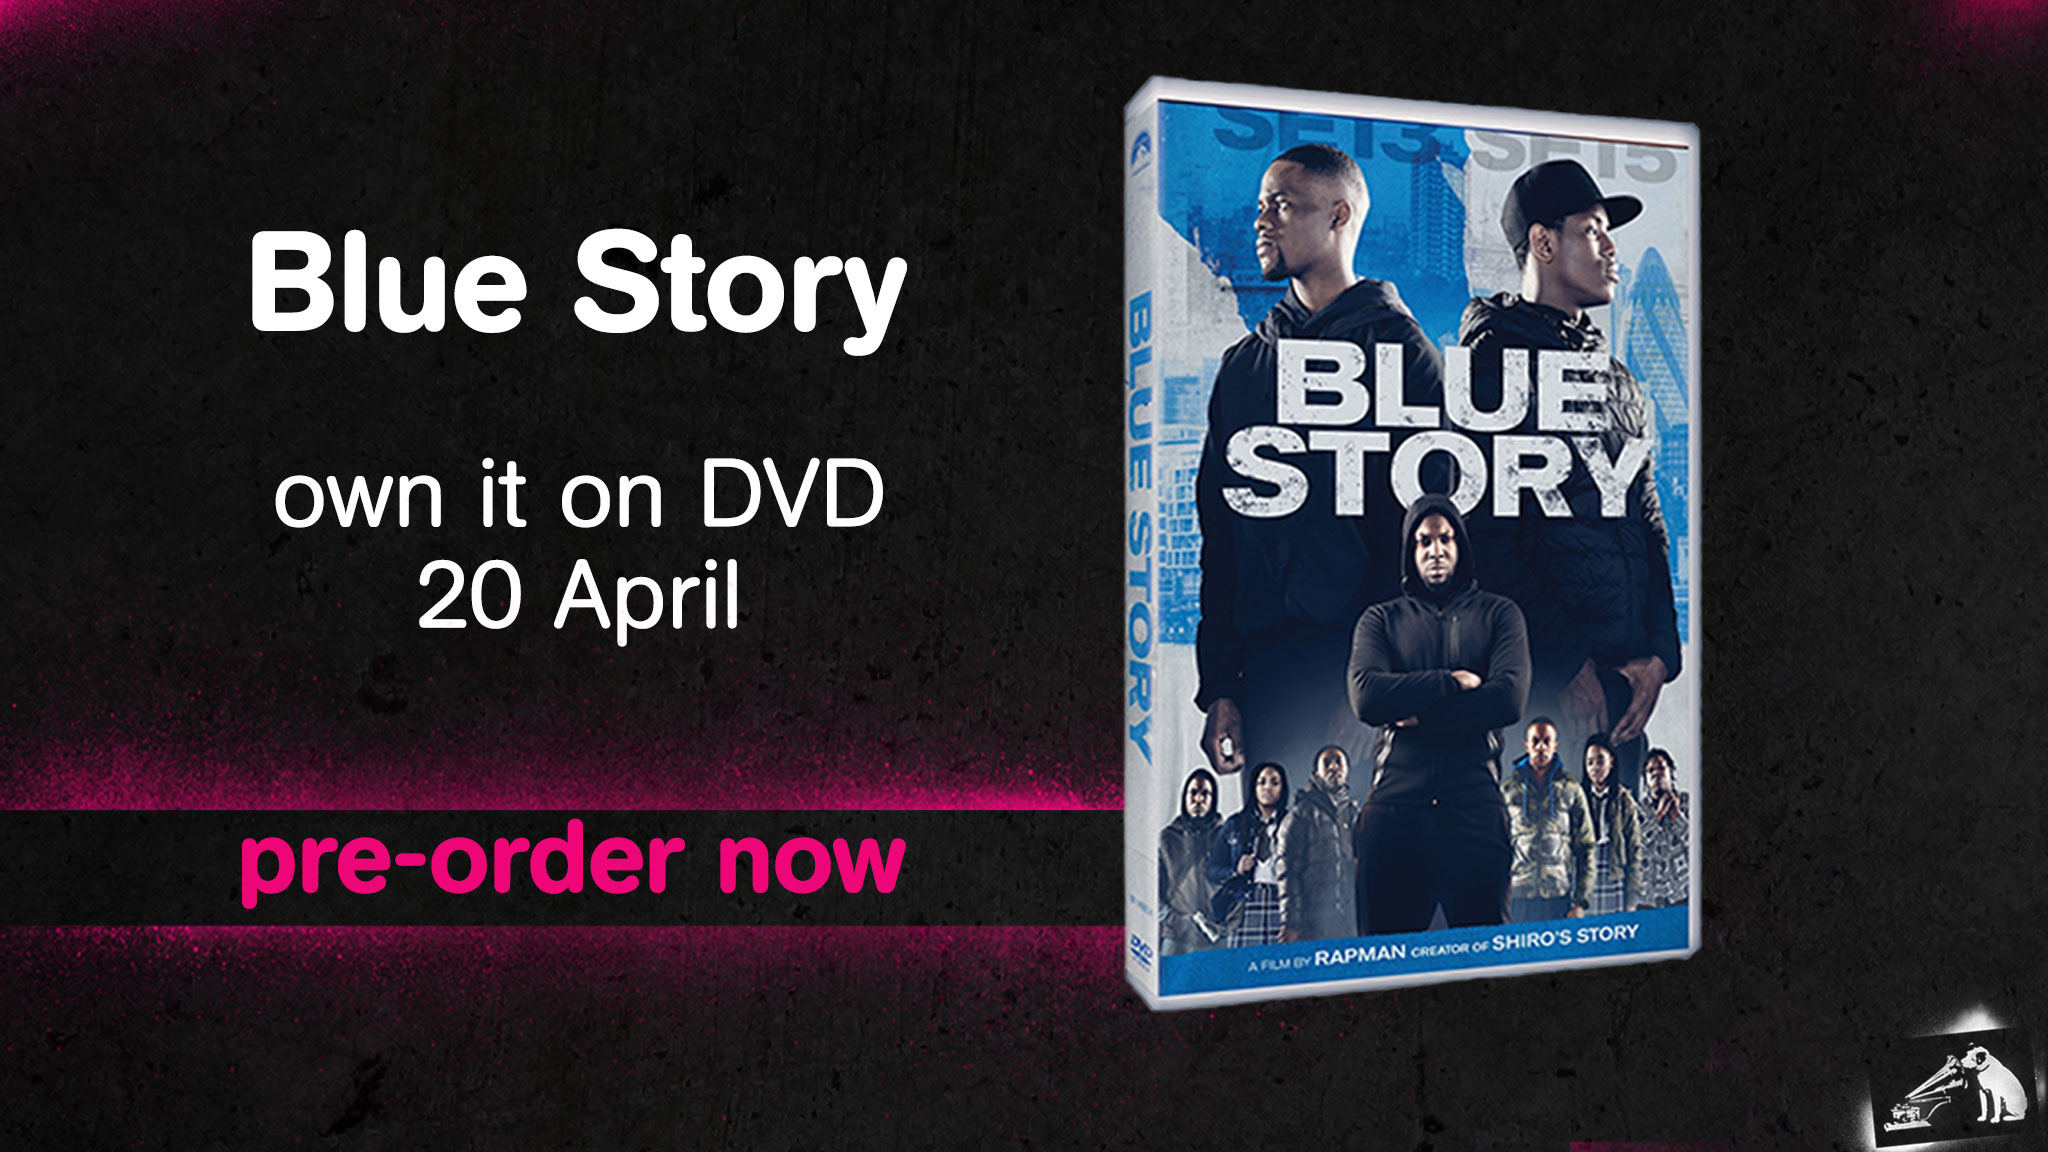 Hmv Monday Brings Realrapman S Incredibly Personal Debut Feature Bluestory To Dvd This One Is Special T Co 7bf8up2tf8 T Co 53icw2pqj8